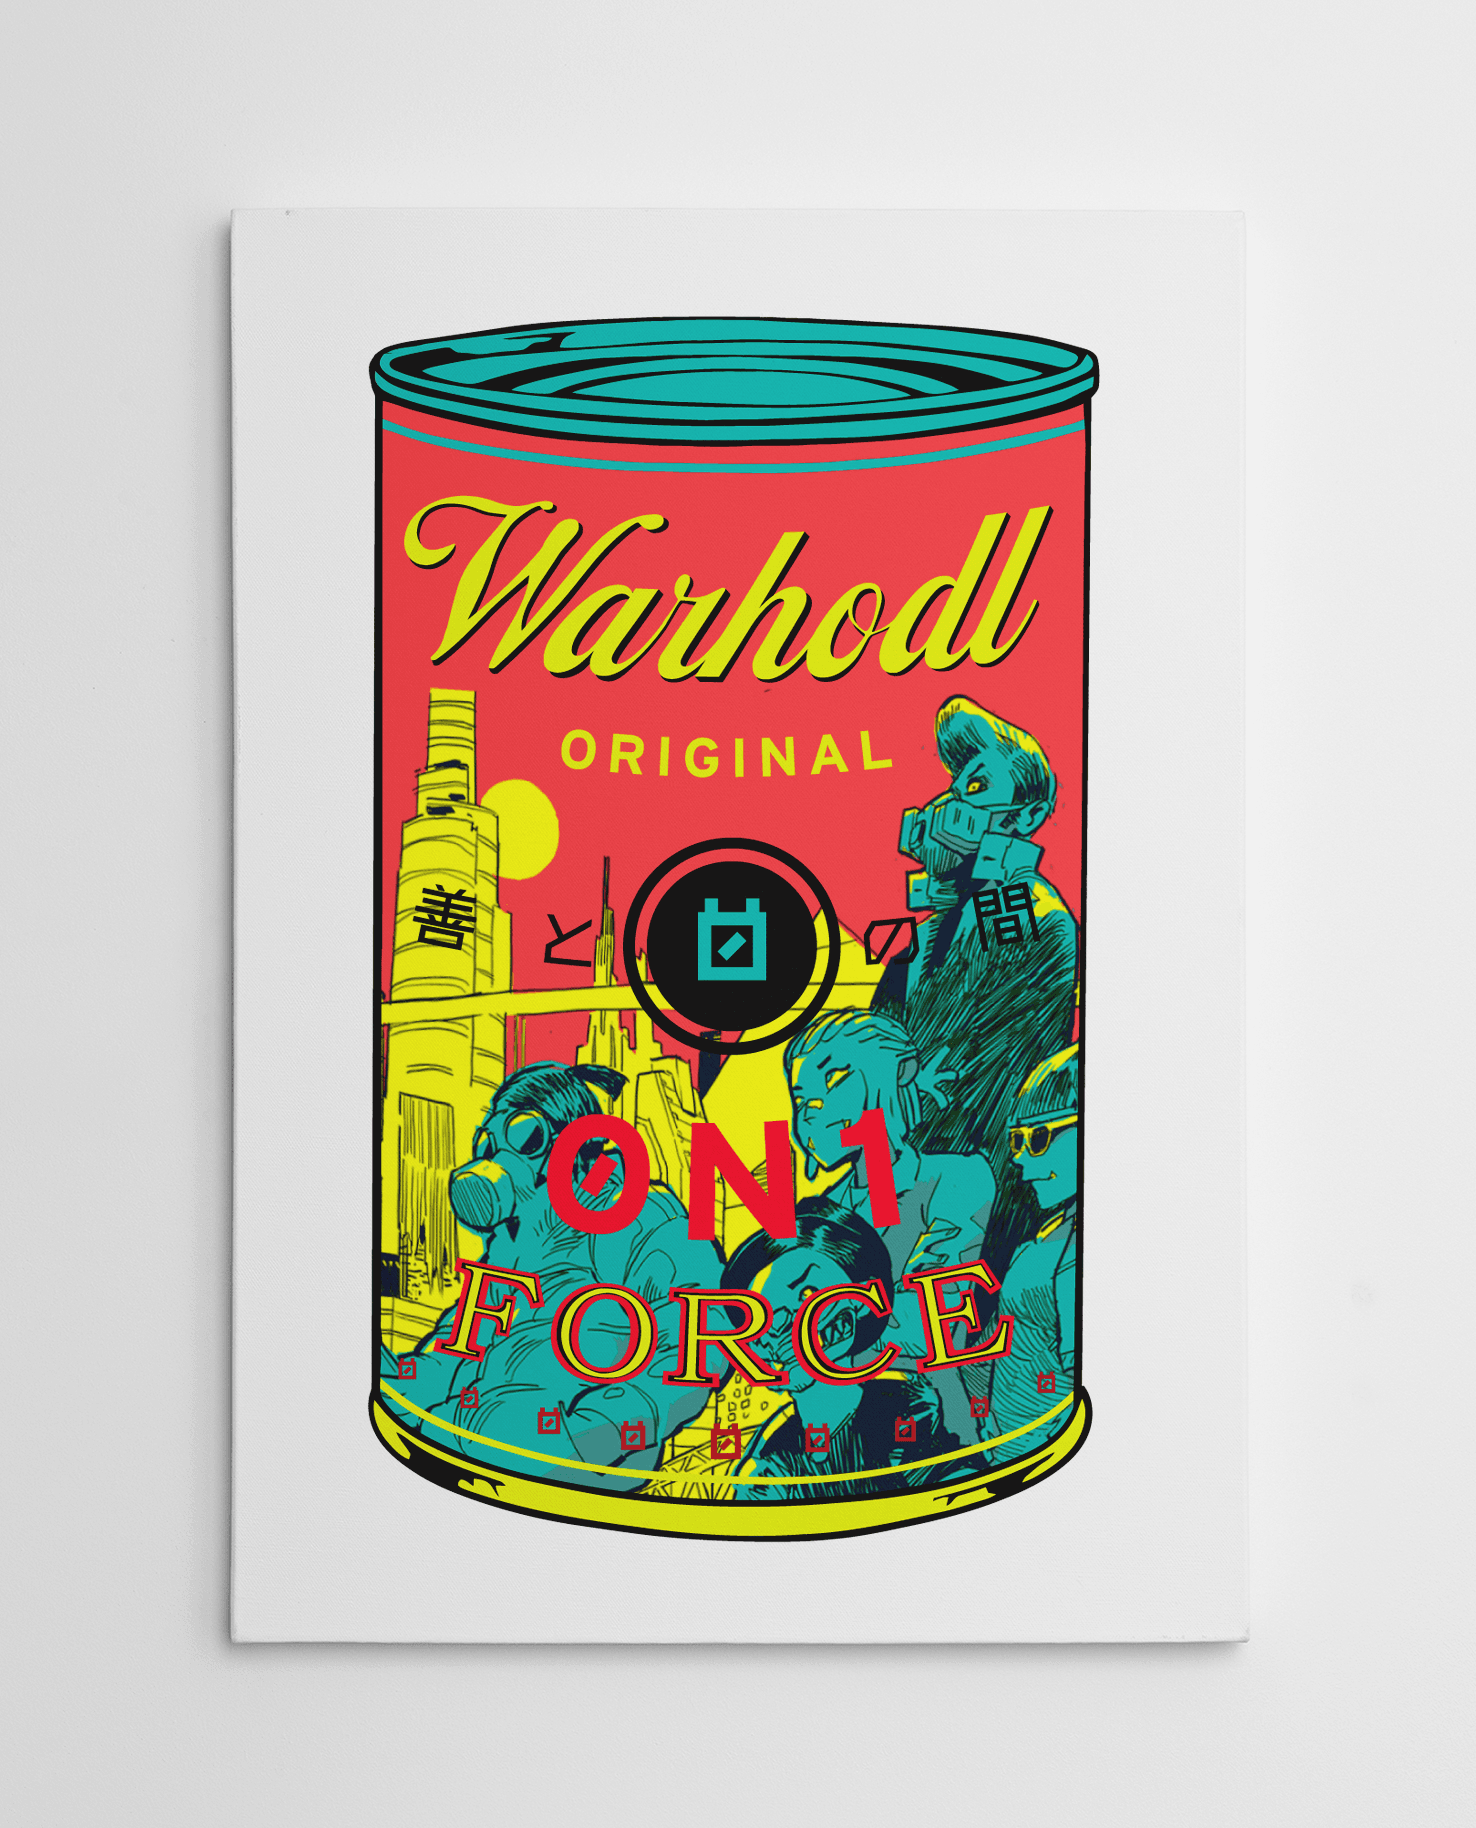 WARHODL Artist Proof 0N1 Force "ETHEREAL ENCLAVE" Can